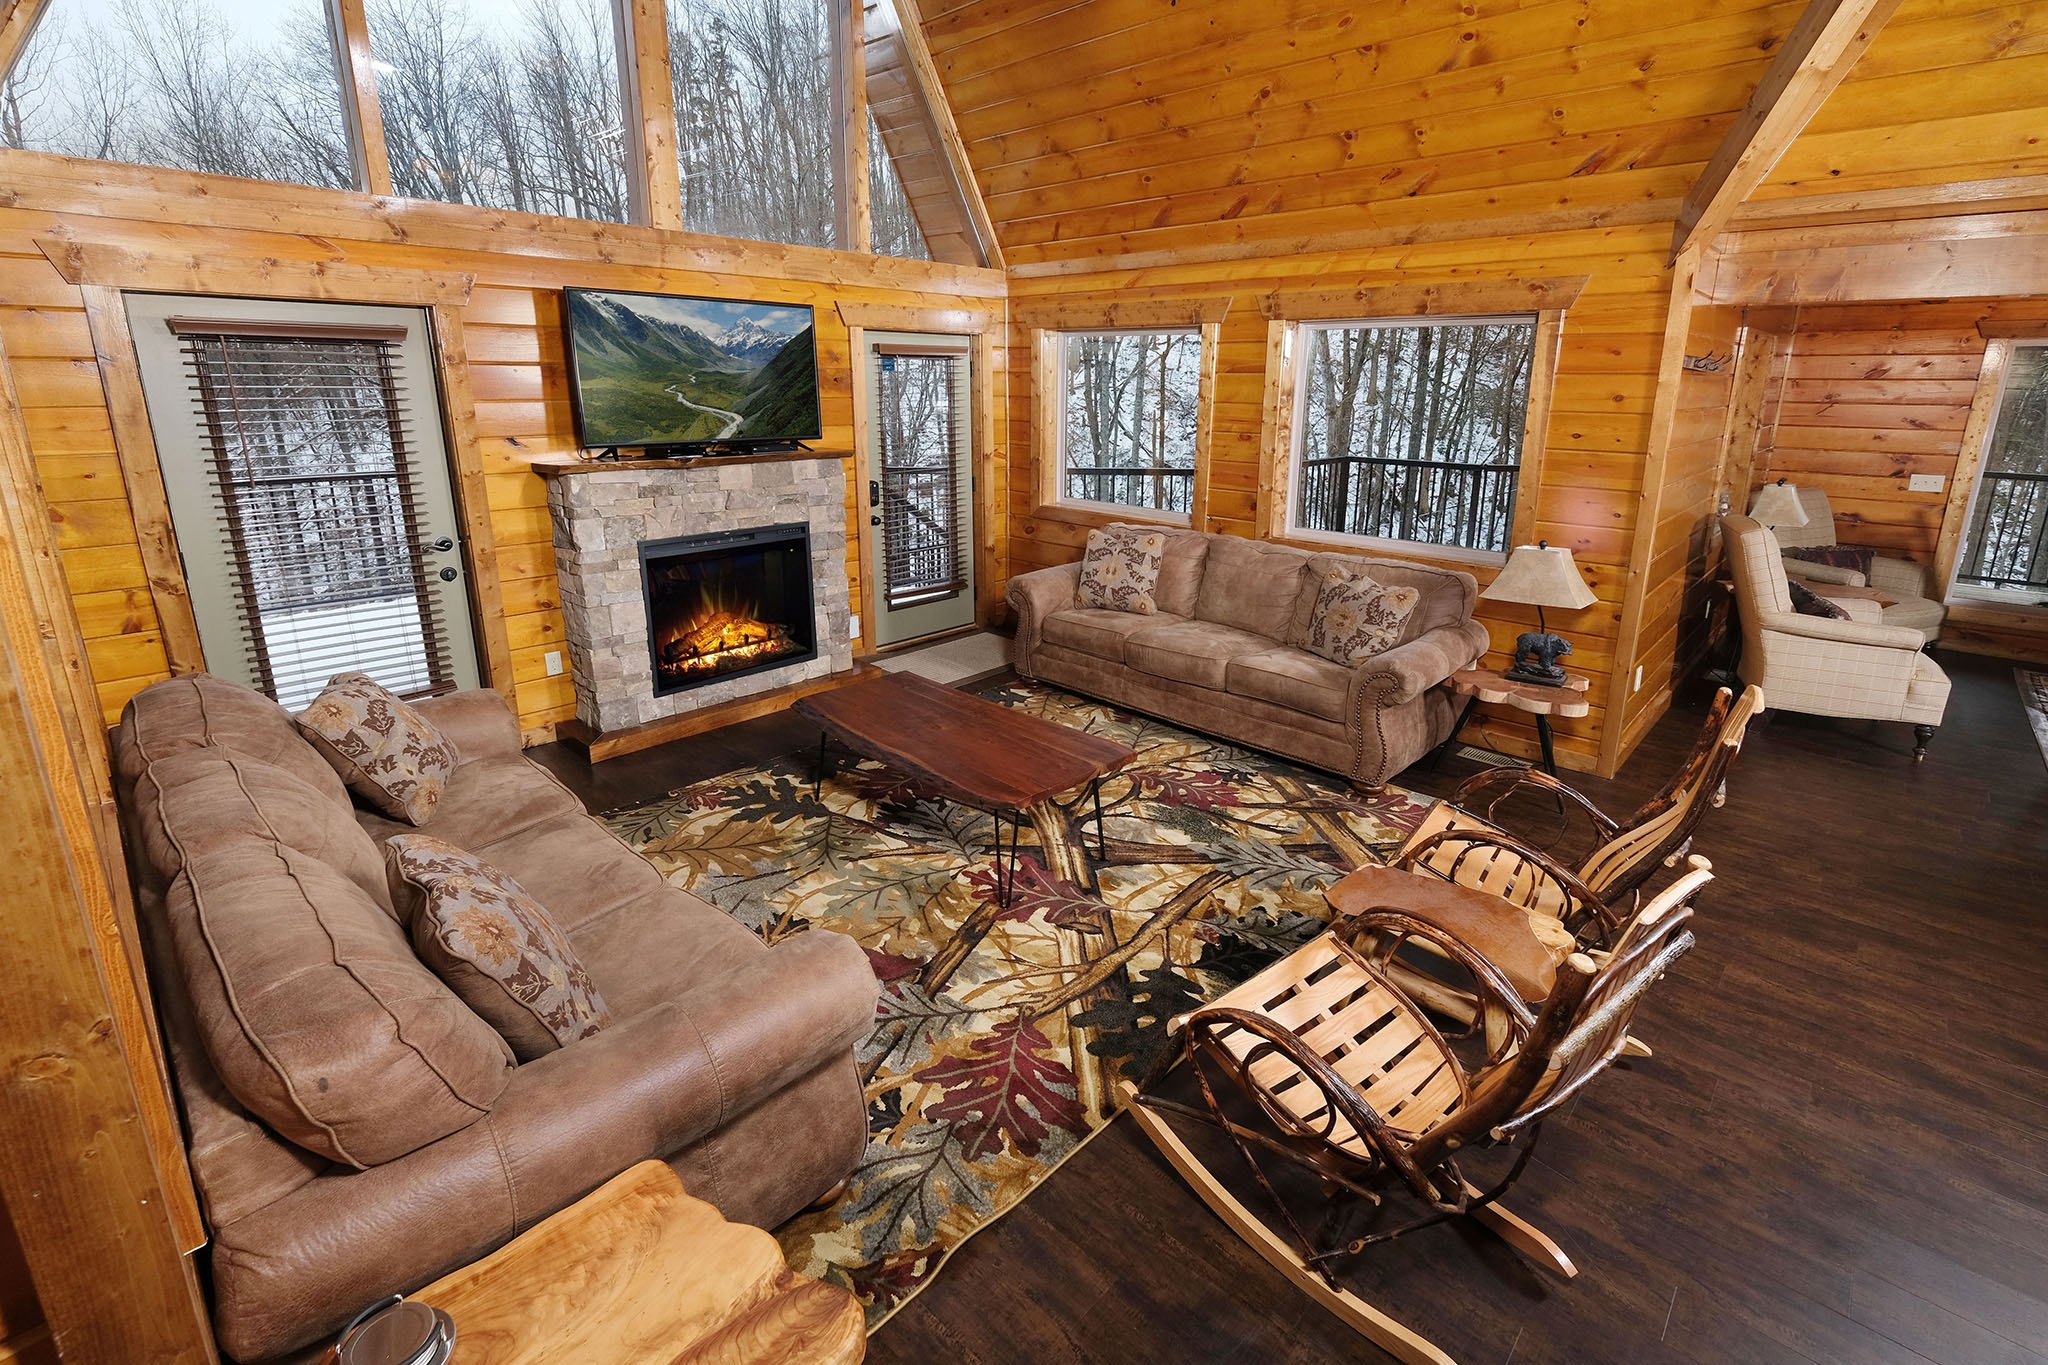 Patriots Den - Comfy Interiors, Cozy fireside nights, Wi-Fi and Porch Swings